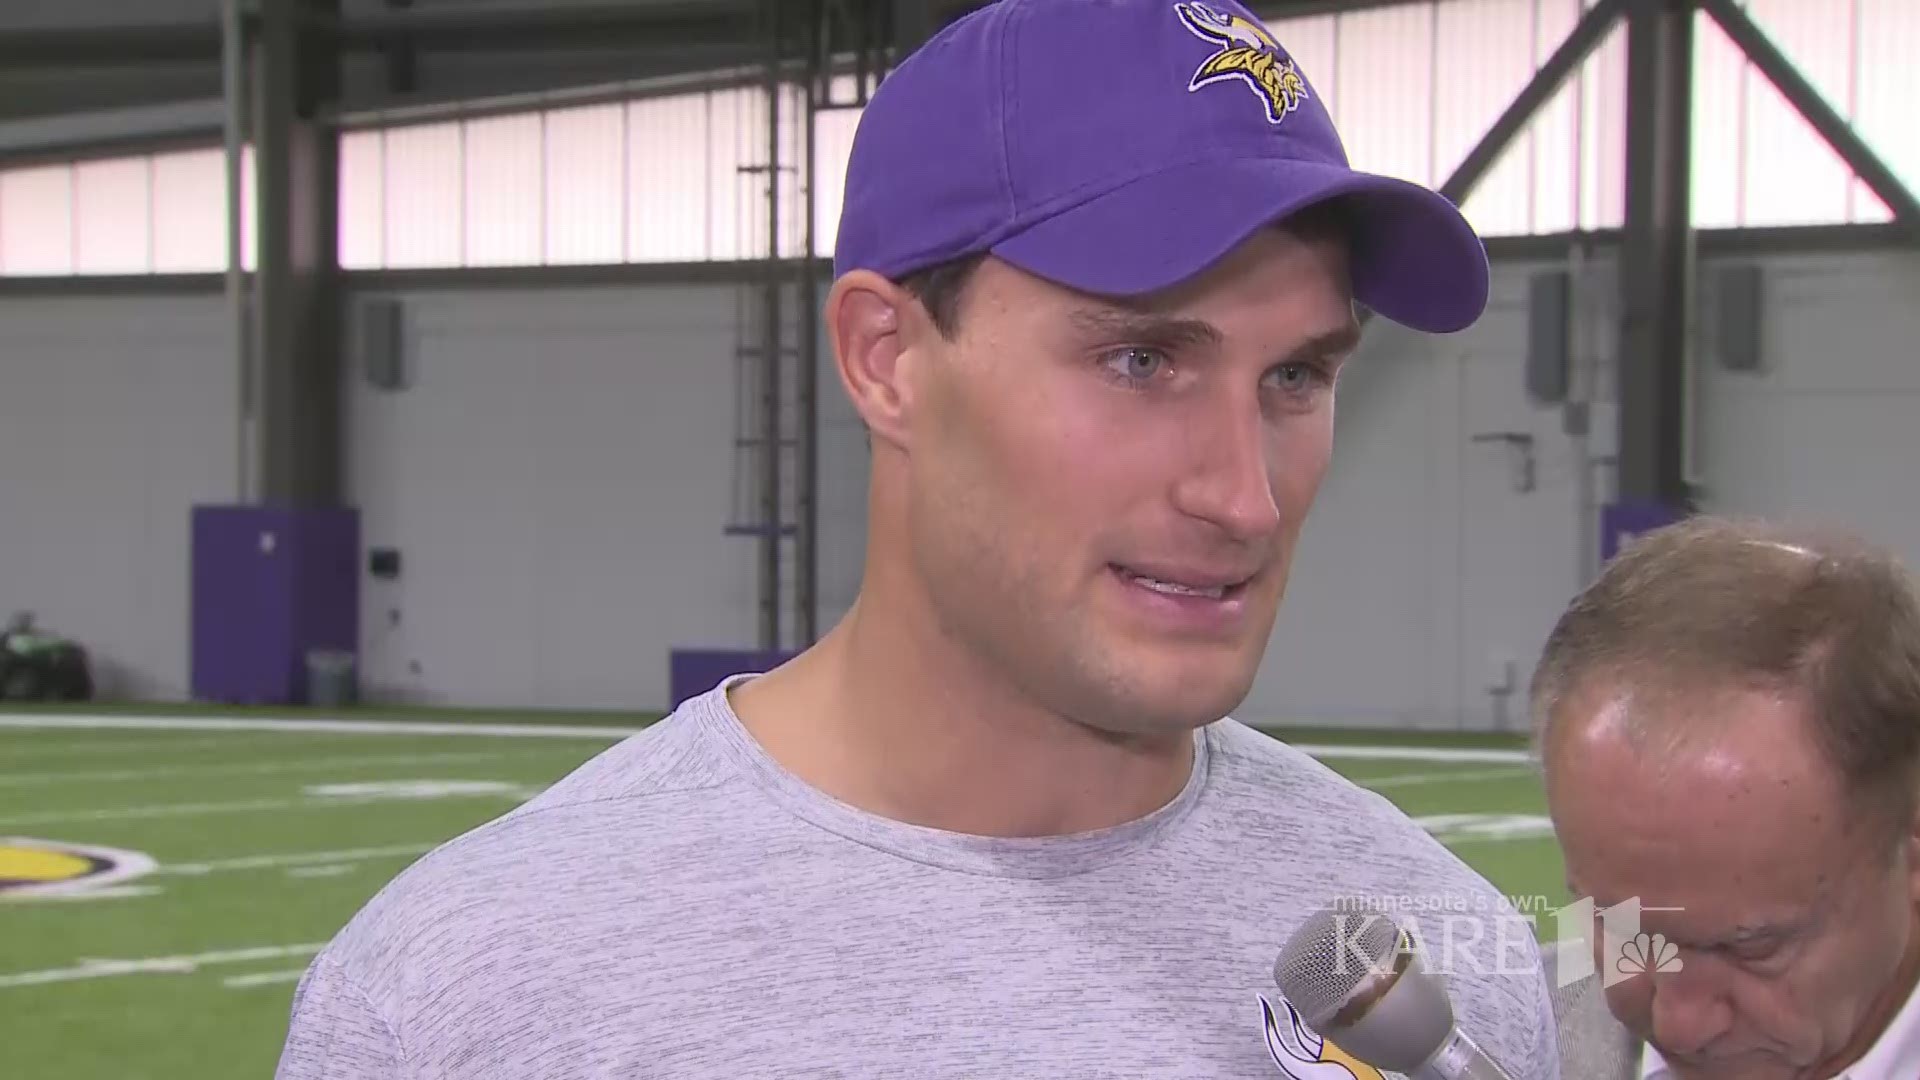 New Vikings QB Kirk Cousins describes his experience with his new team and new town so far.